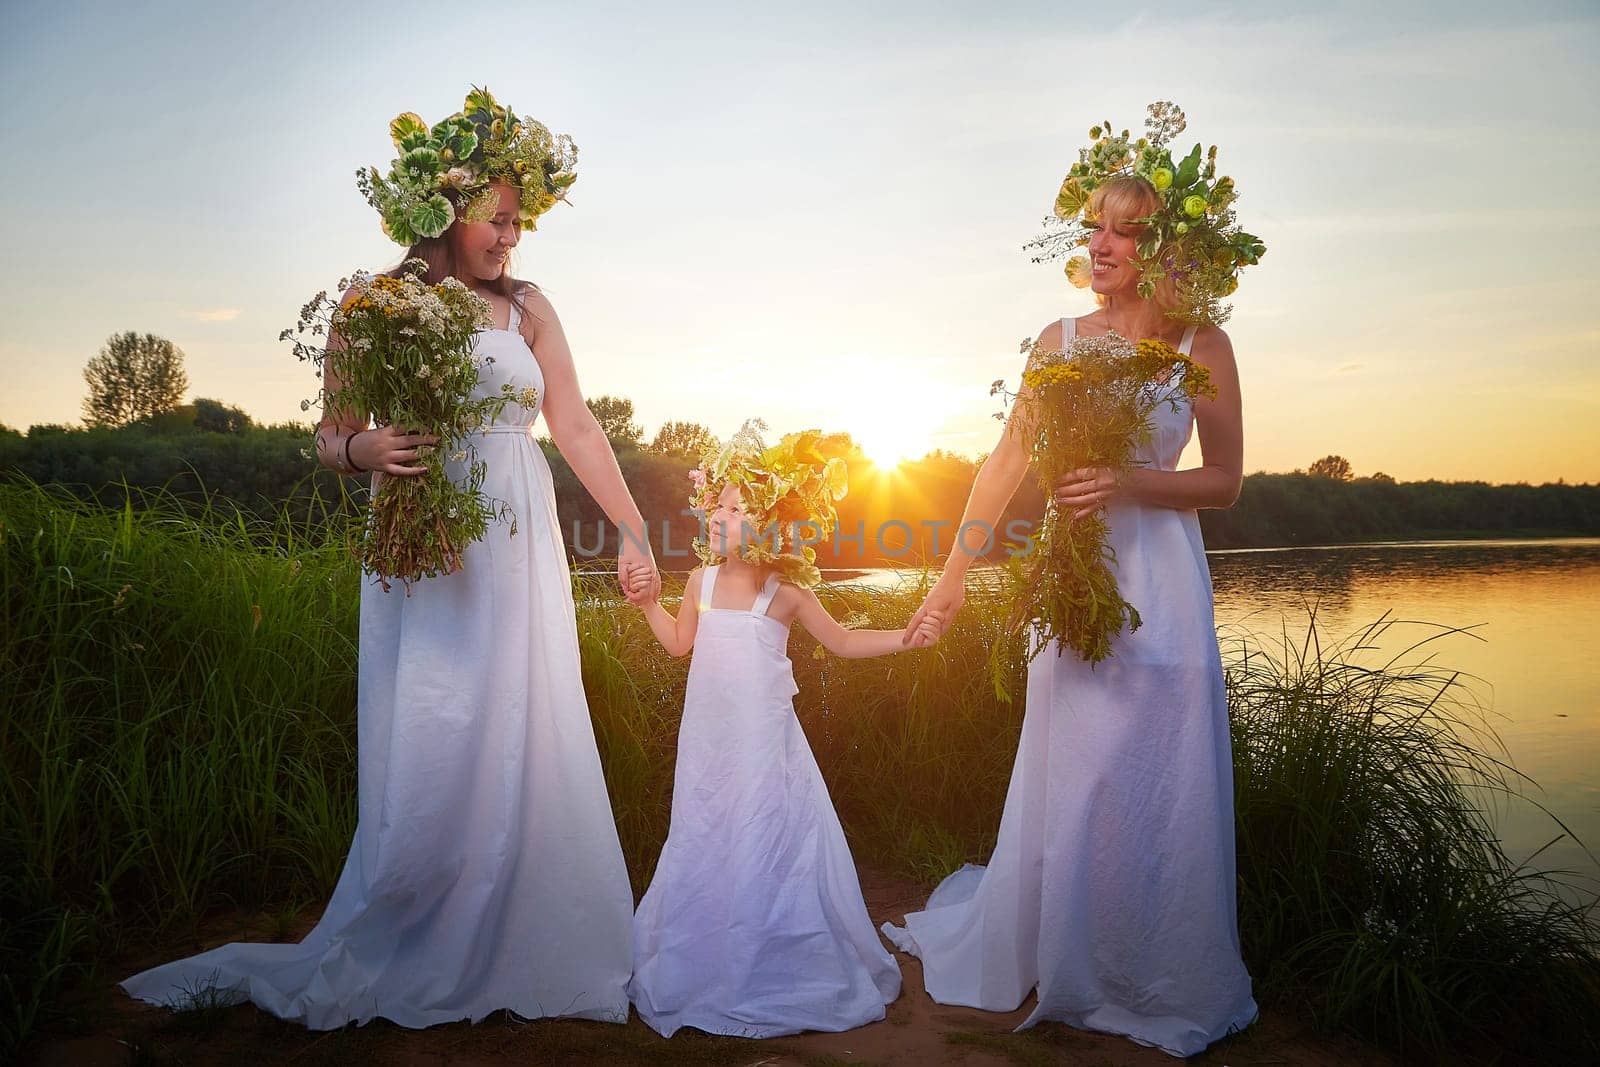 Ivan Kupala Celebration. Three Girls With Floral Wreaths by the River at Sunset. Family clad in white dresses celebrate Ivan Kupala by a river at dusk. by keleny